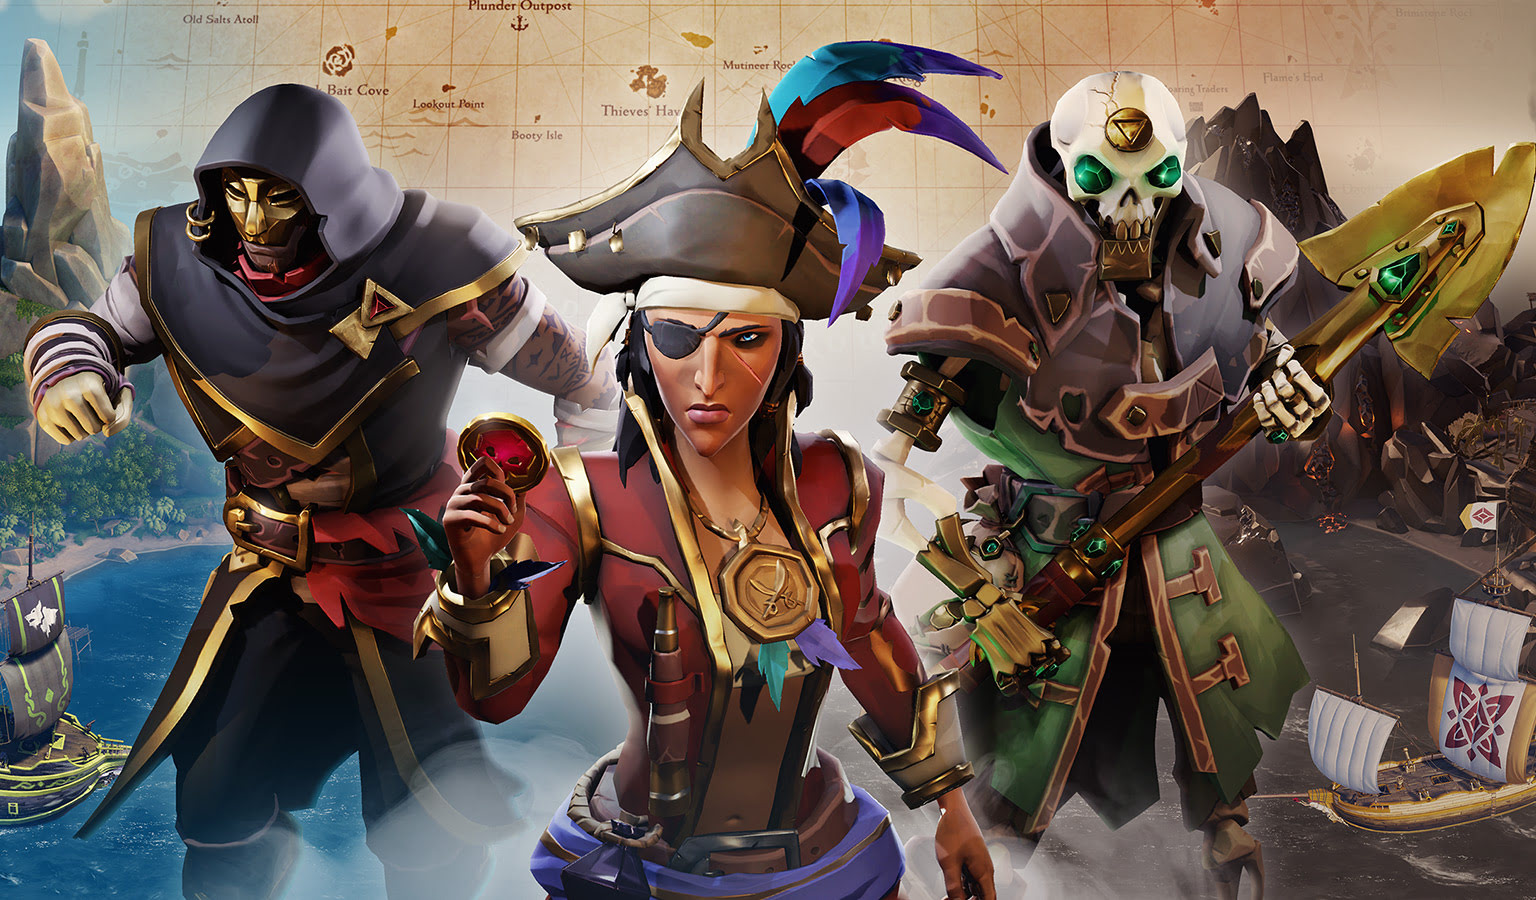 How to get the Sea of Thieves Twitch Prime content